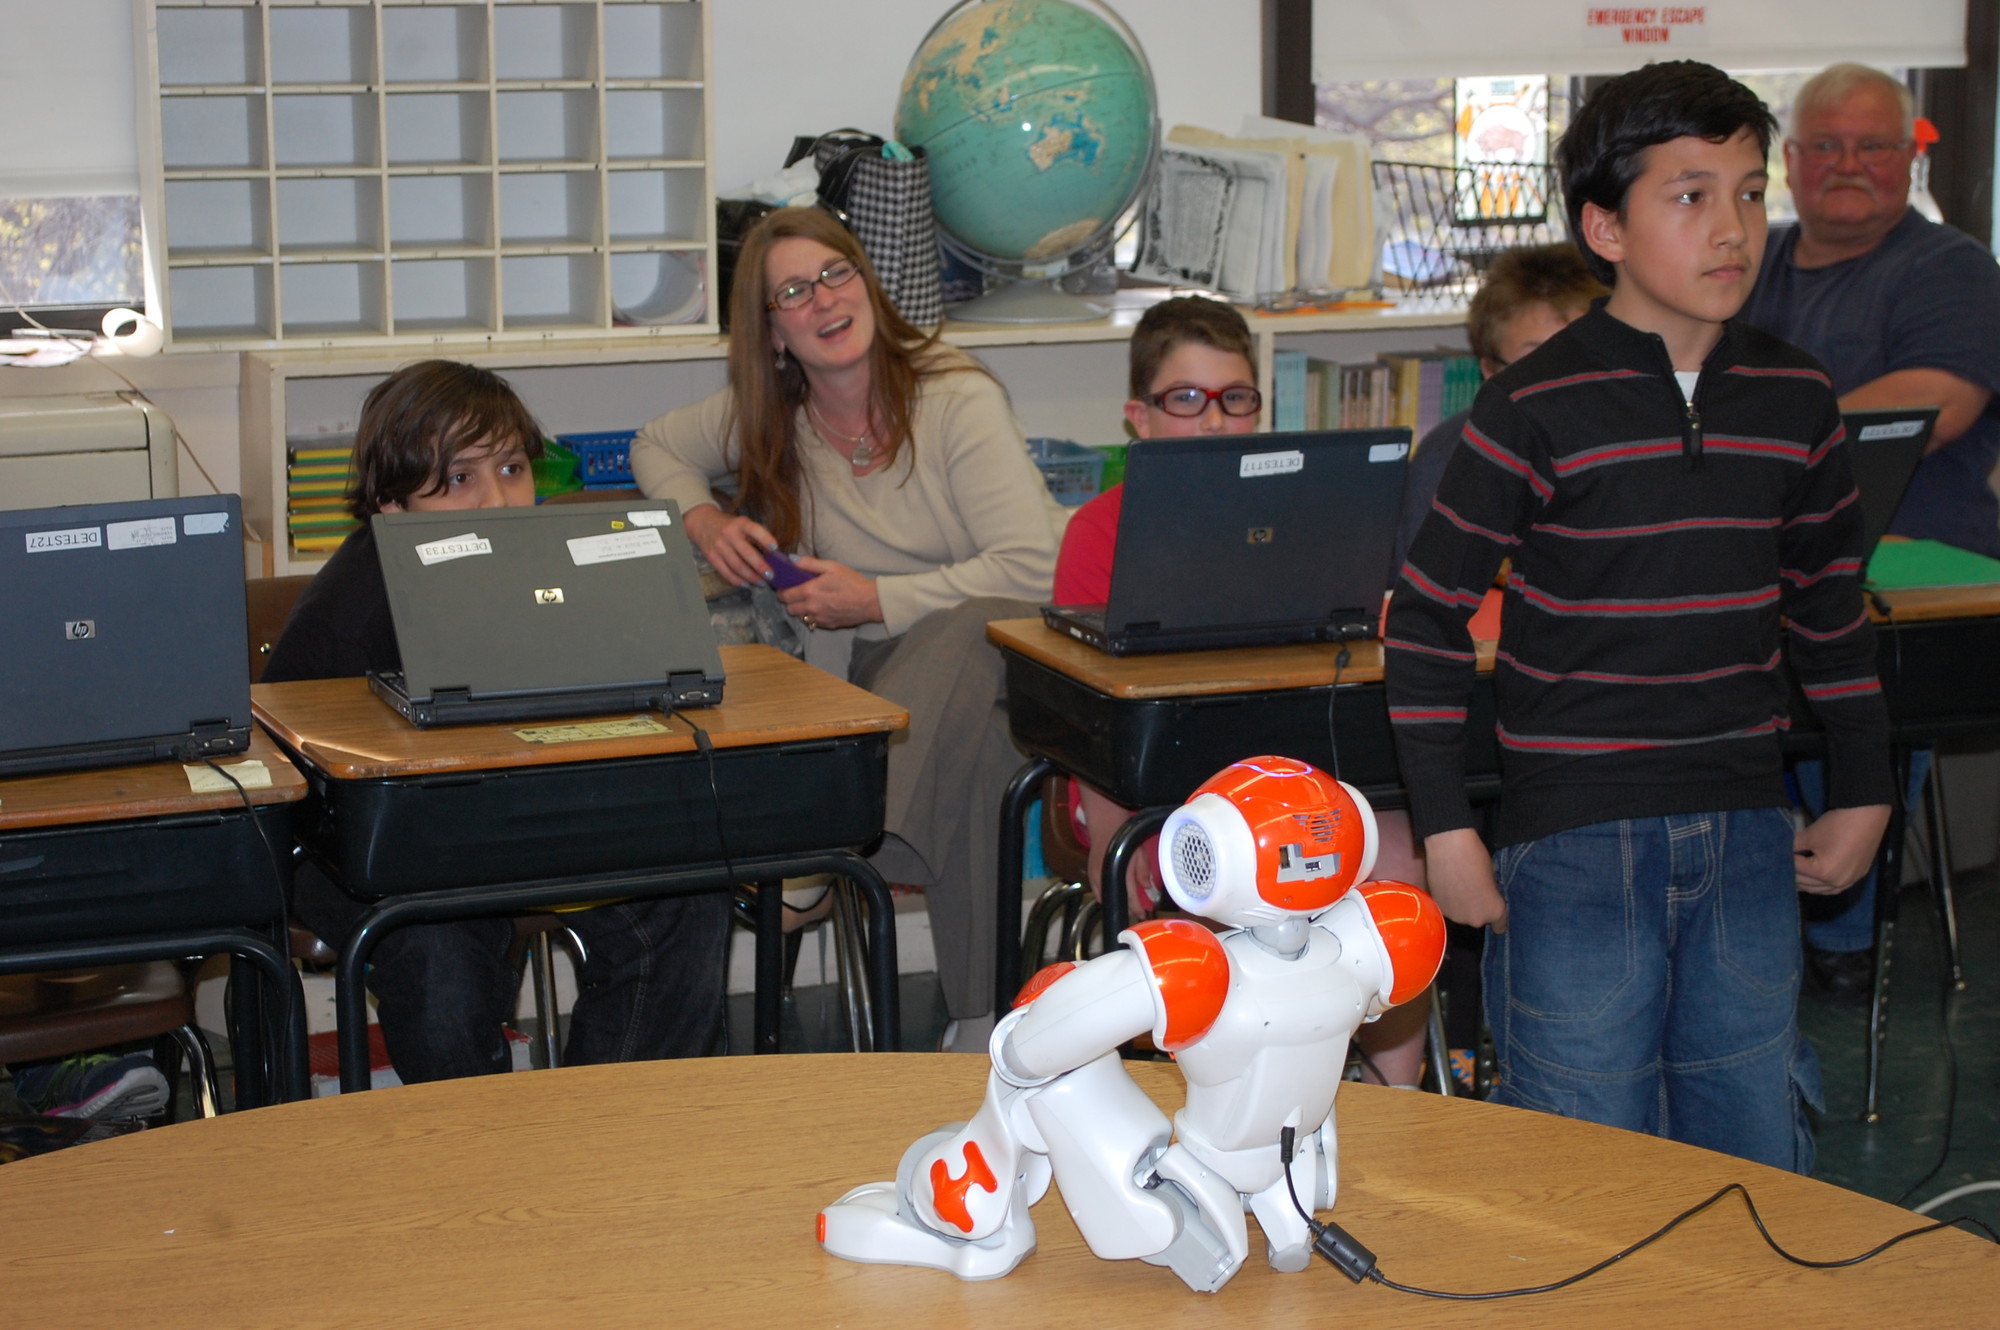 Students from the district’s gifted and talented program, along with their parents, were able to learn about robots.